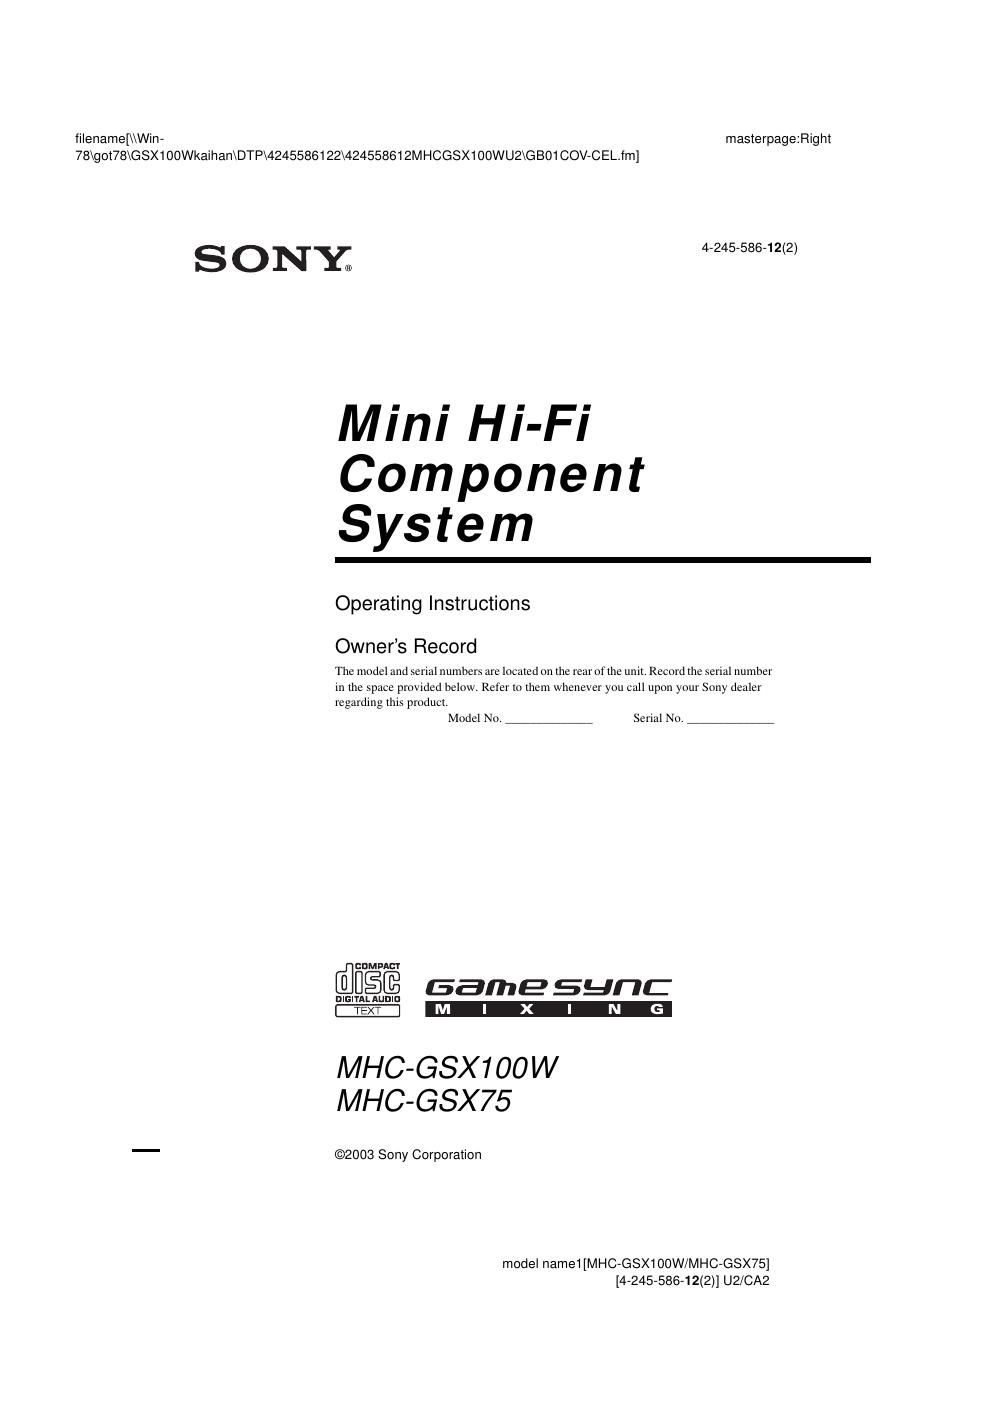 sony mhc gsx 100 w owners manual